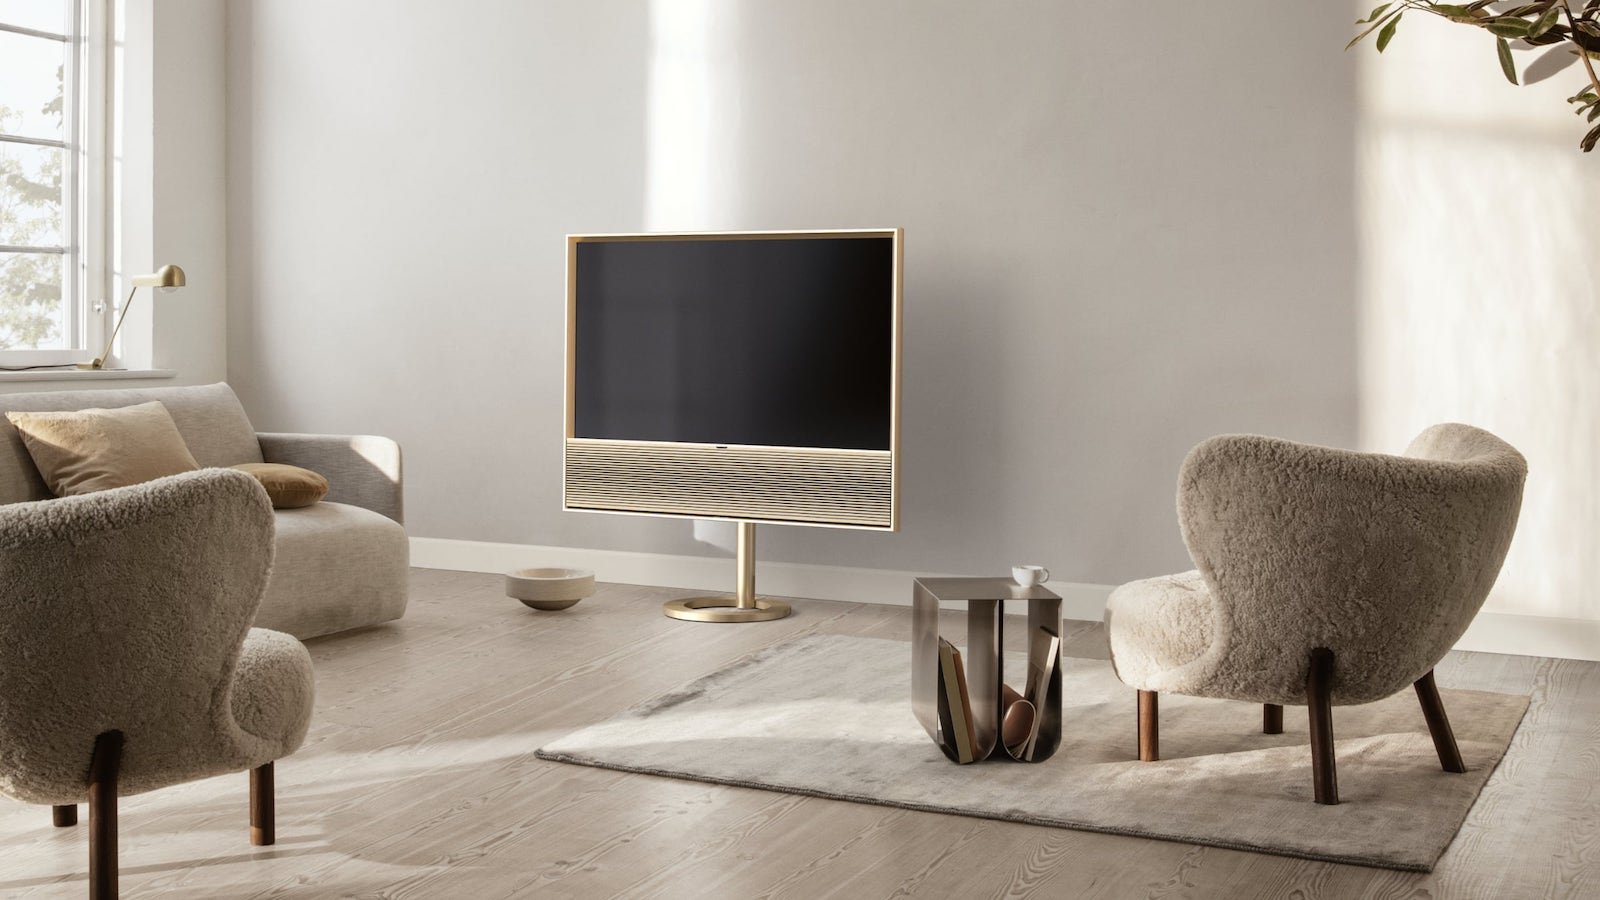 Bang & Olufsen Beovision Contour all-in-one OLED TV has 4 advanced sound features